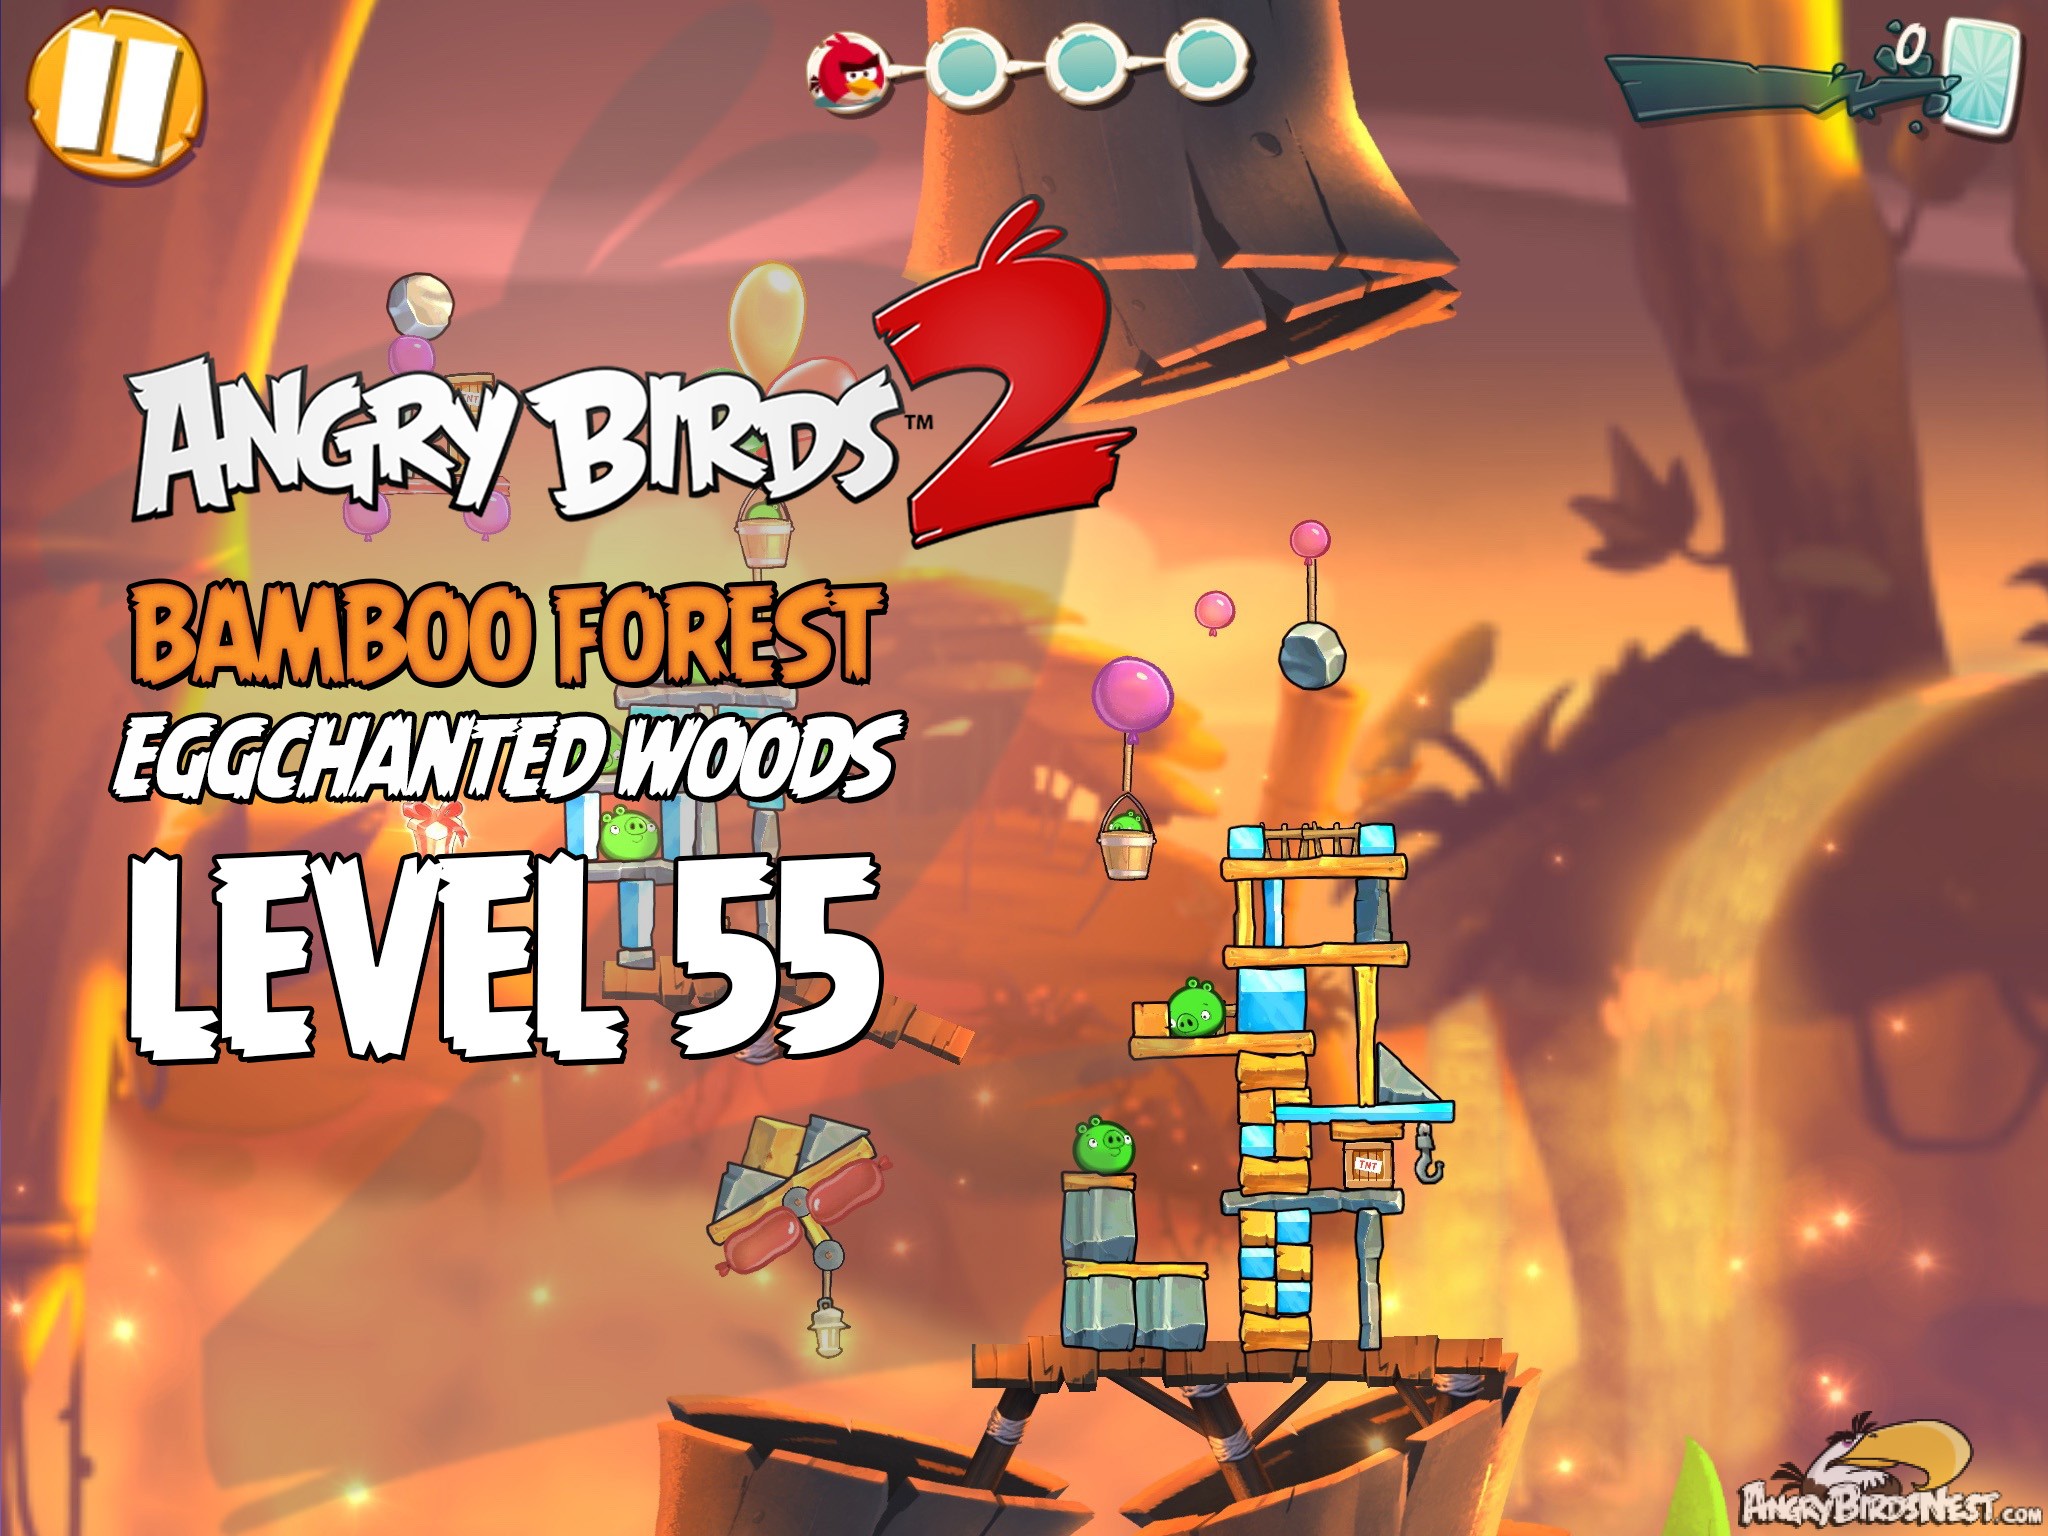 Angry Birds 2 Bamboo Forest Eggchanted Woods Level 55